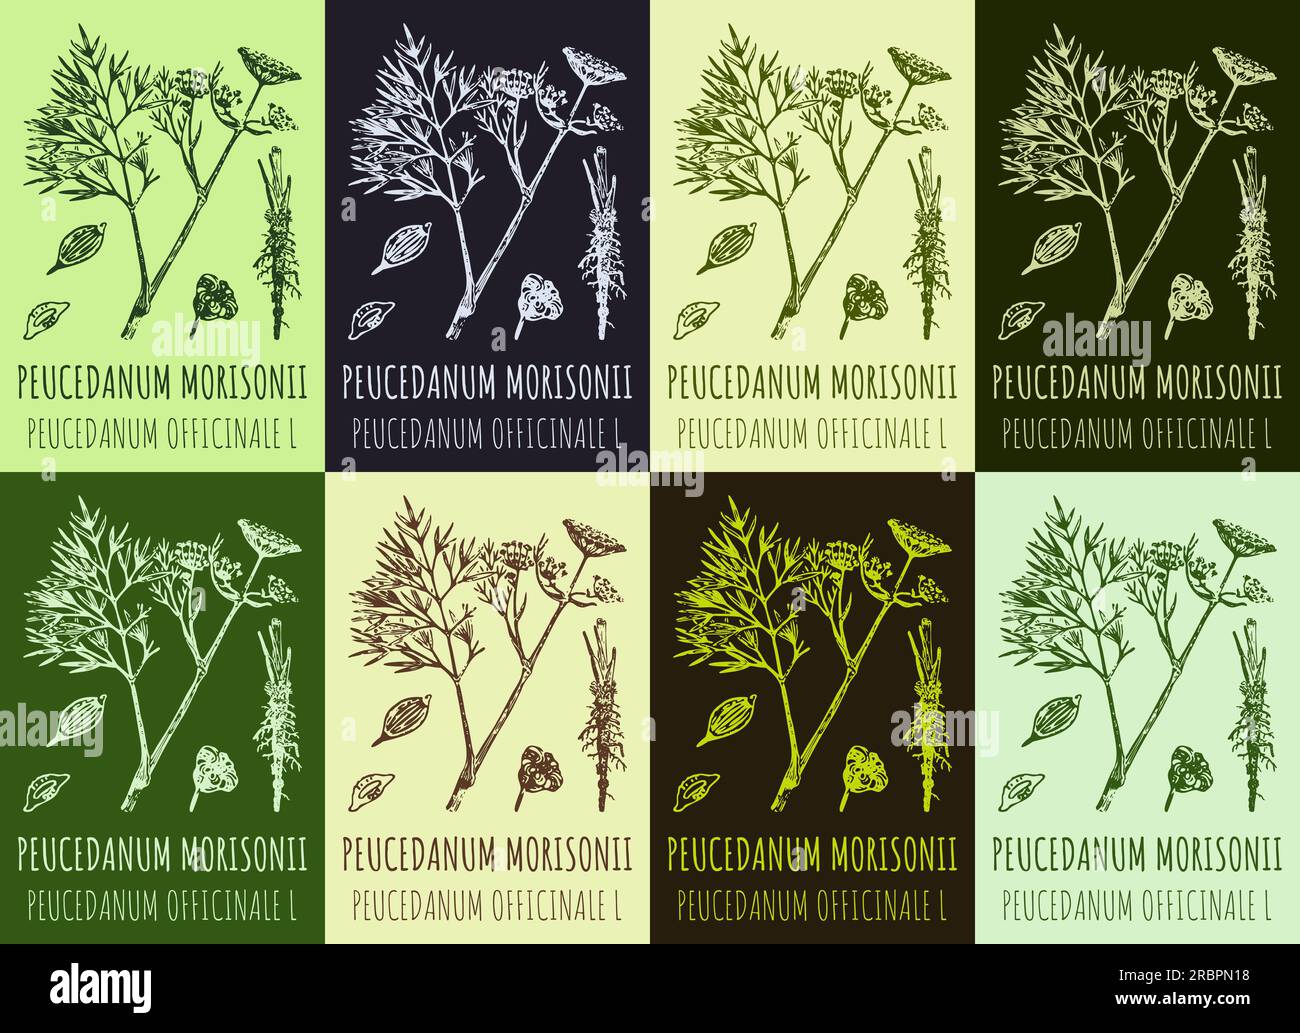 Set of vector drawing PEUCEDANUM MORISONII in various colors. Hand drawn illustration. The Latin name is PEUCEDANUM OFFICINALE L. Stock Photo